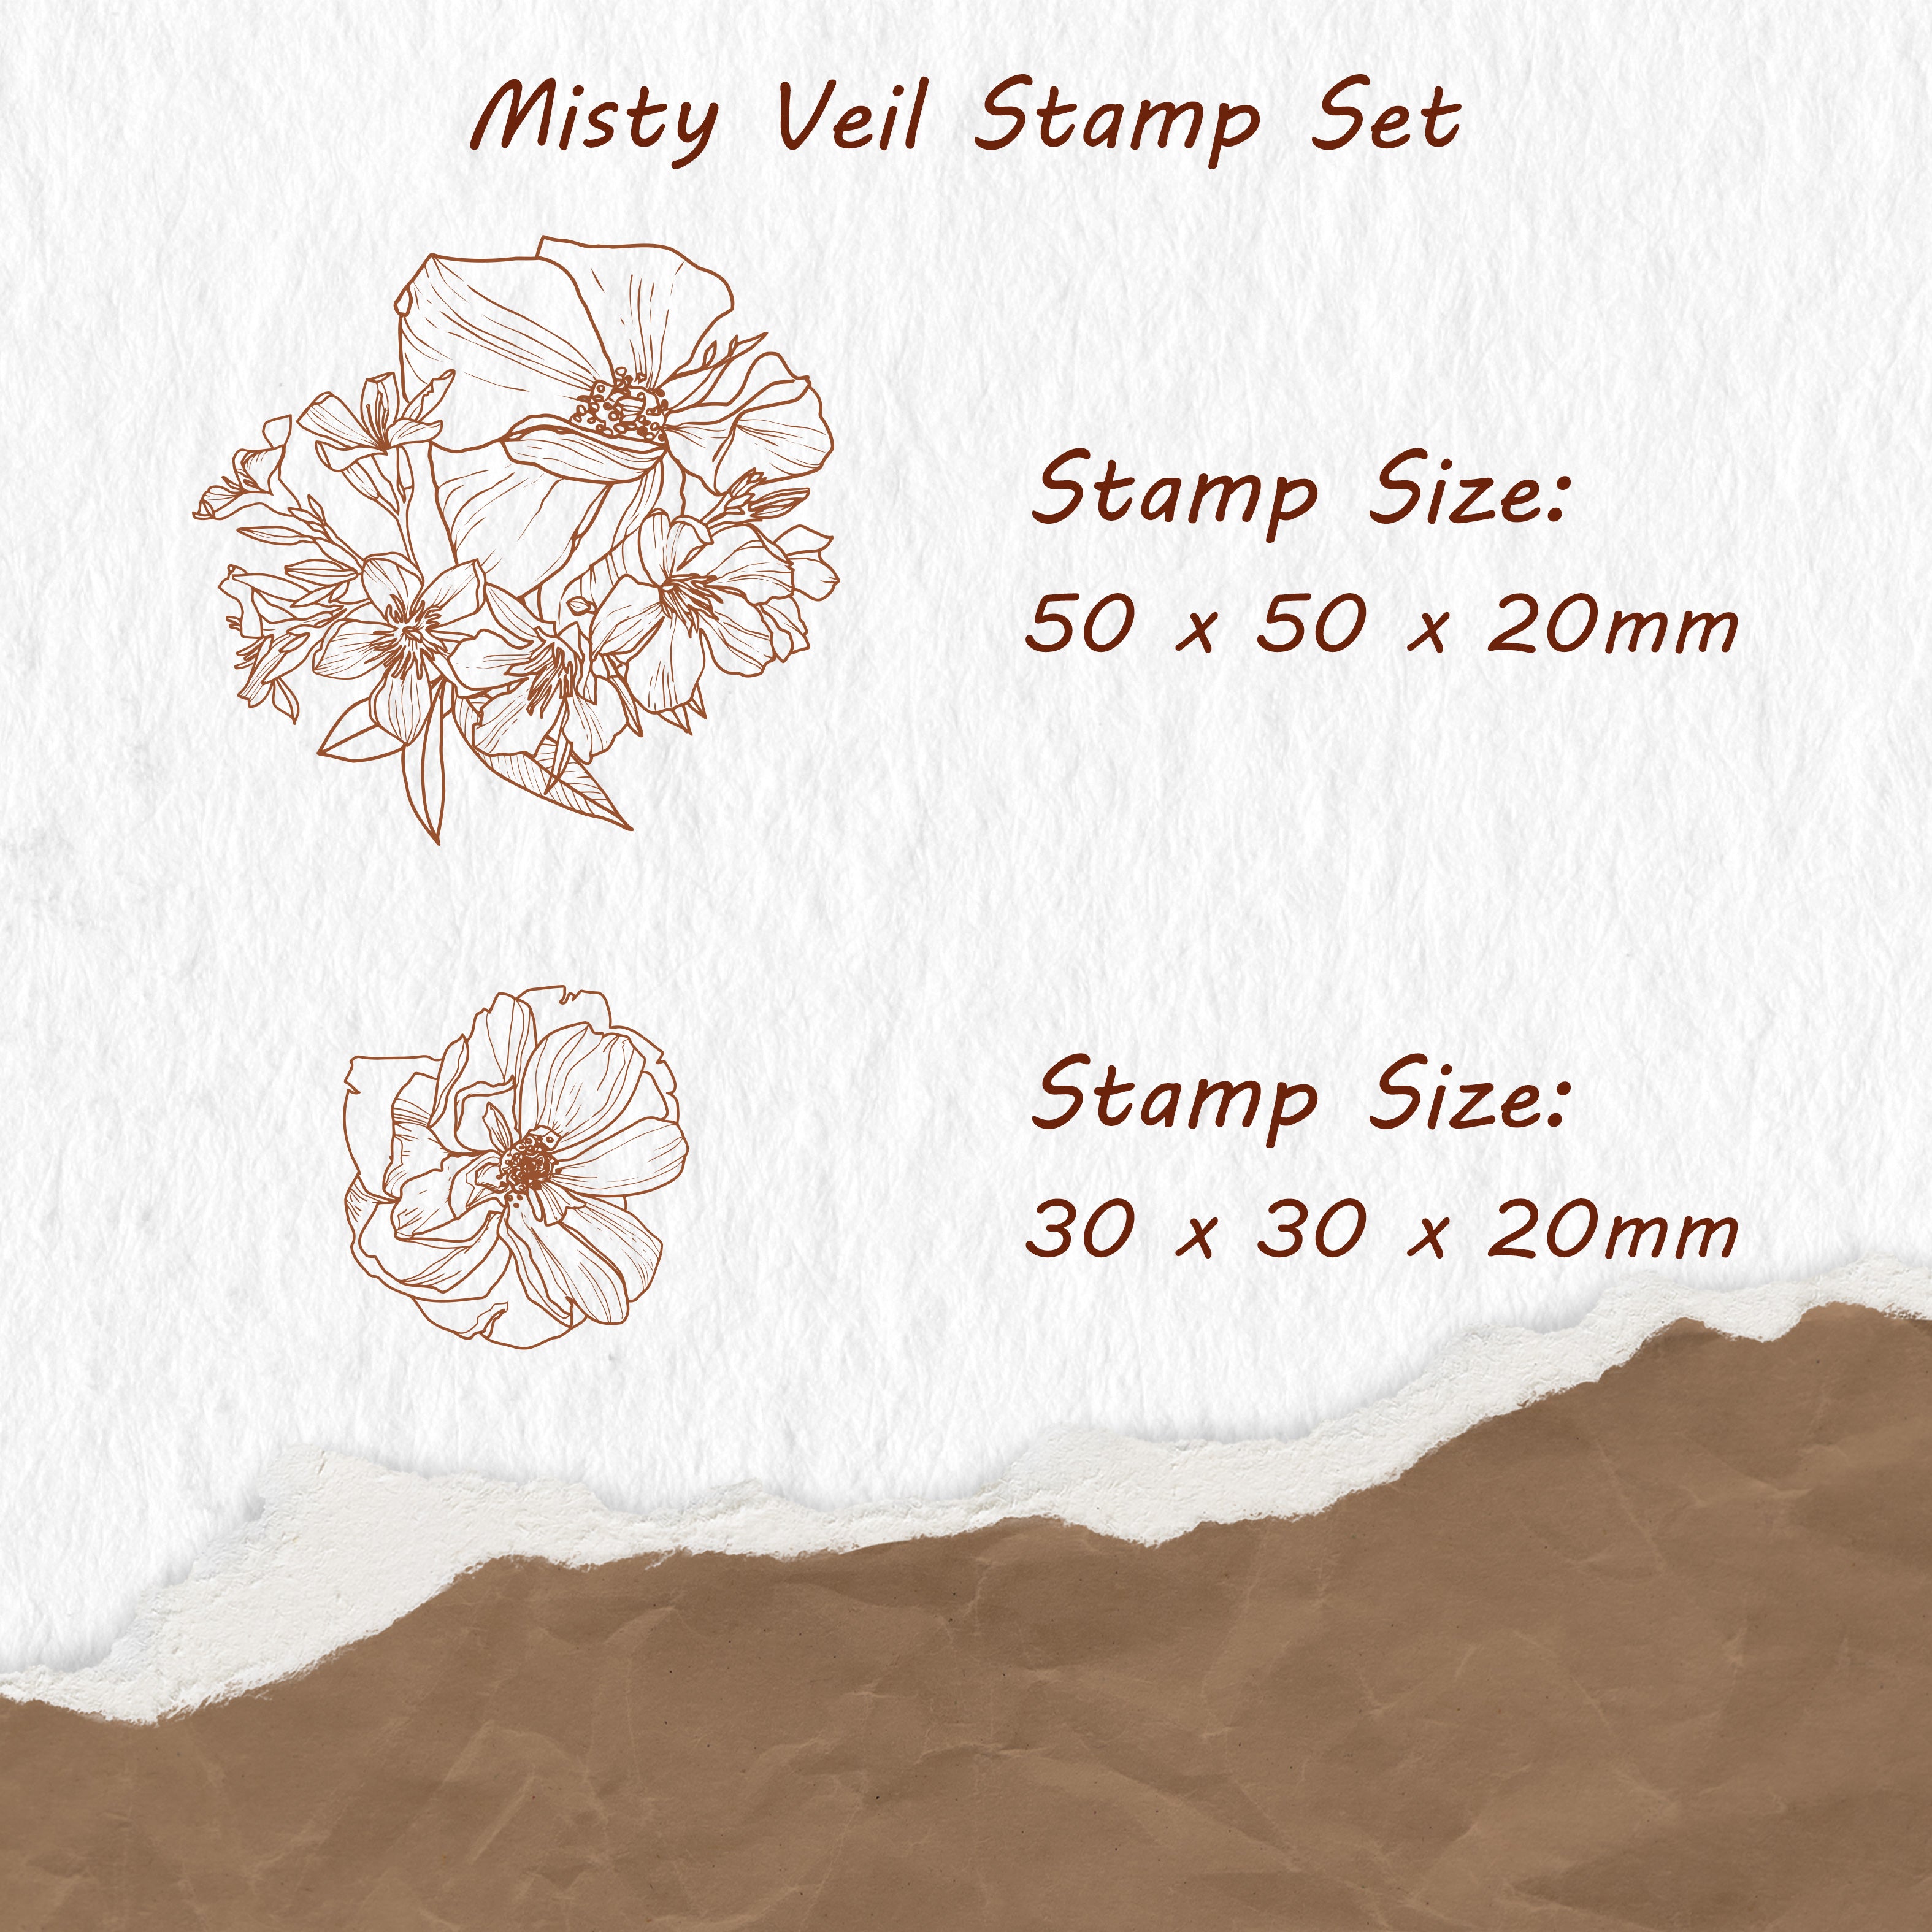 Misty Veil Stamp Set | The Washi Tape Shop. Beautiful Washi and Decorative Tape For Bullet Journals, Gift Wrapping, Planner Decoration and DIY Projects